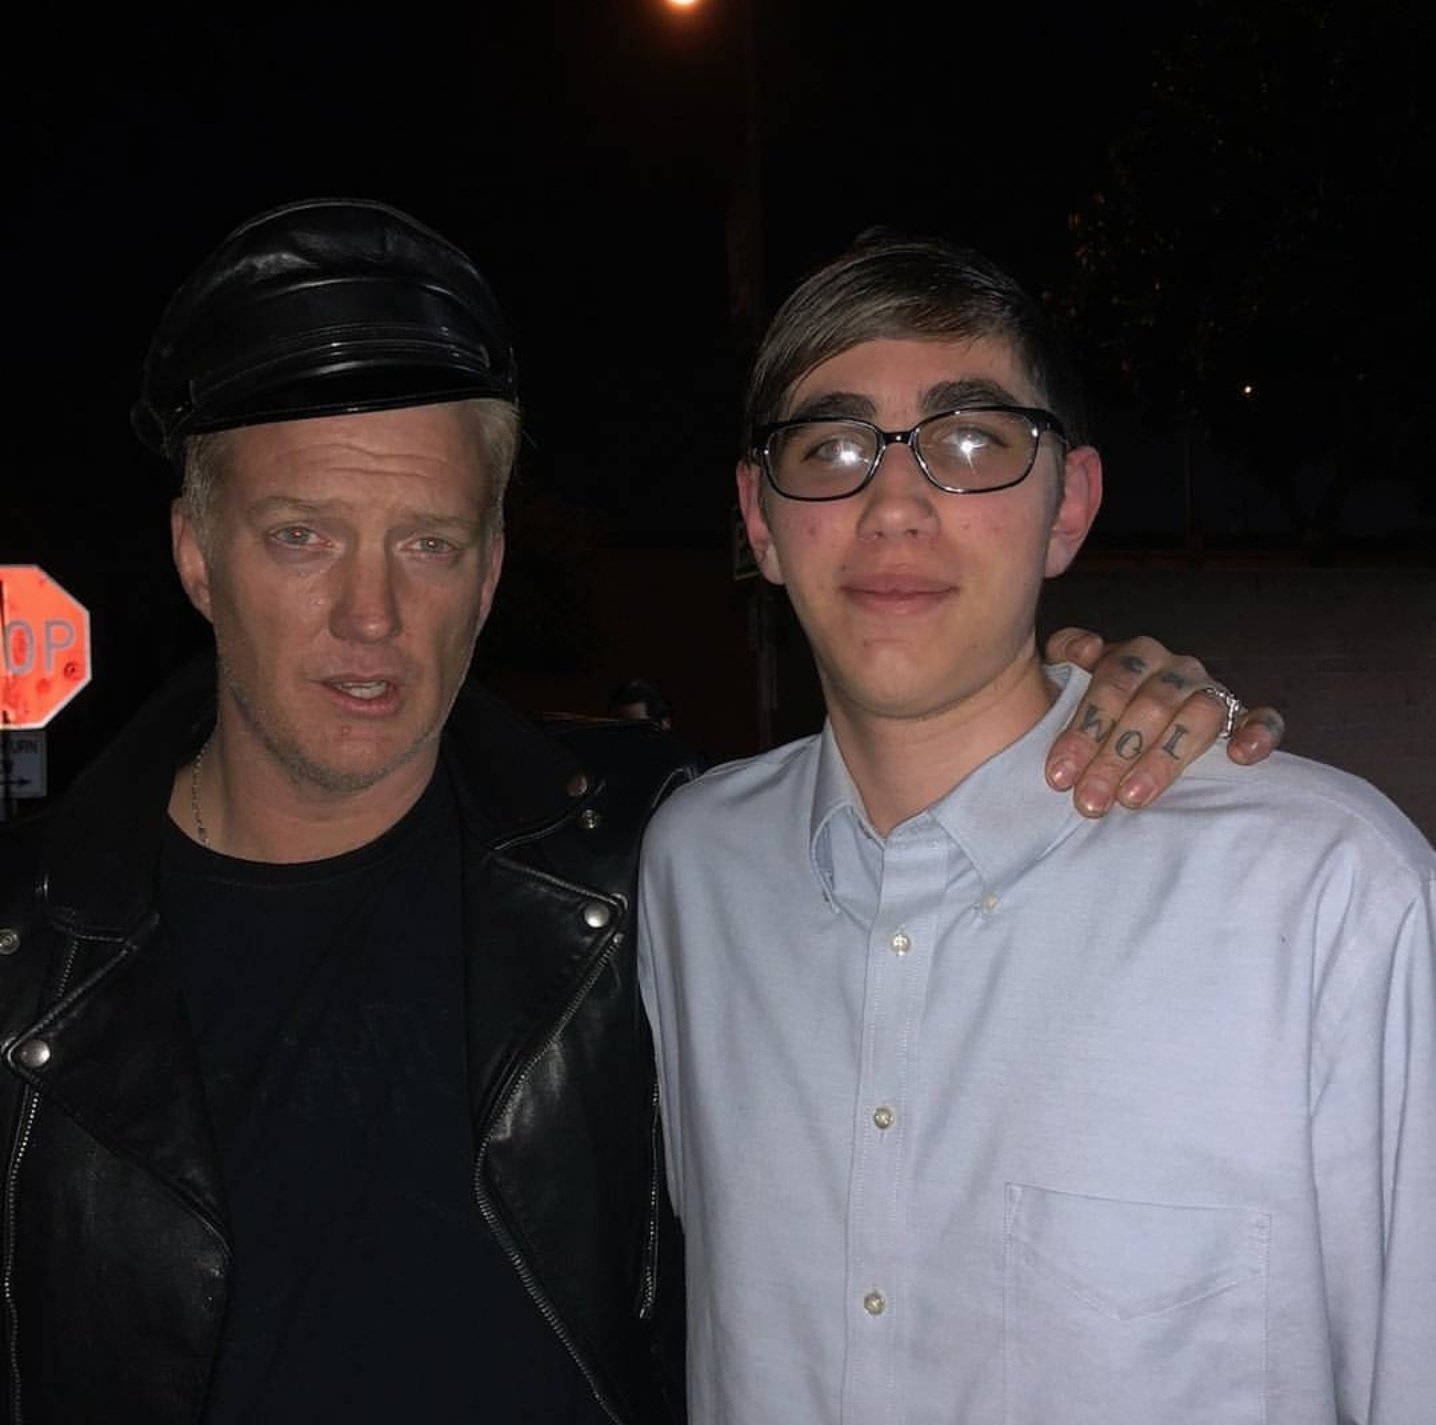  to when I got to meet Josh Homme. Happy birthday to the front man of Queens of the Stone Age 